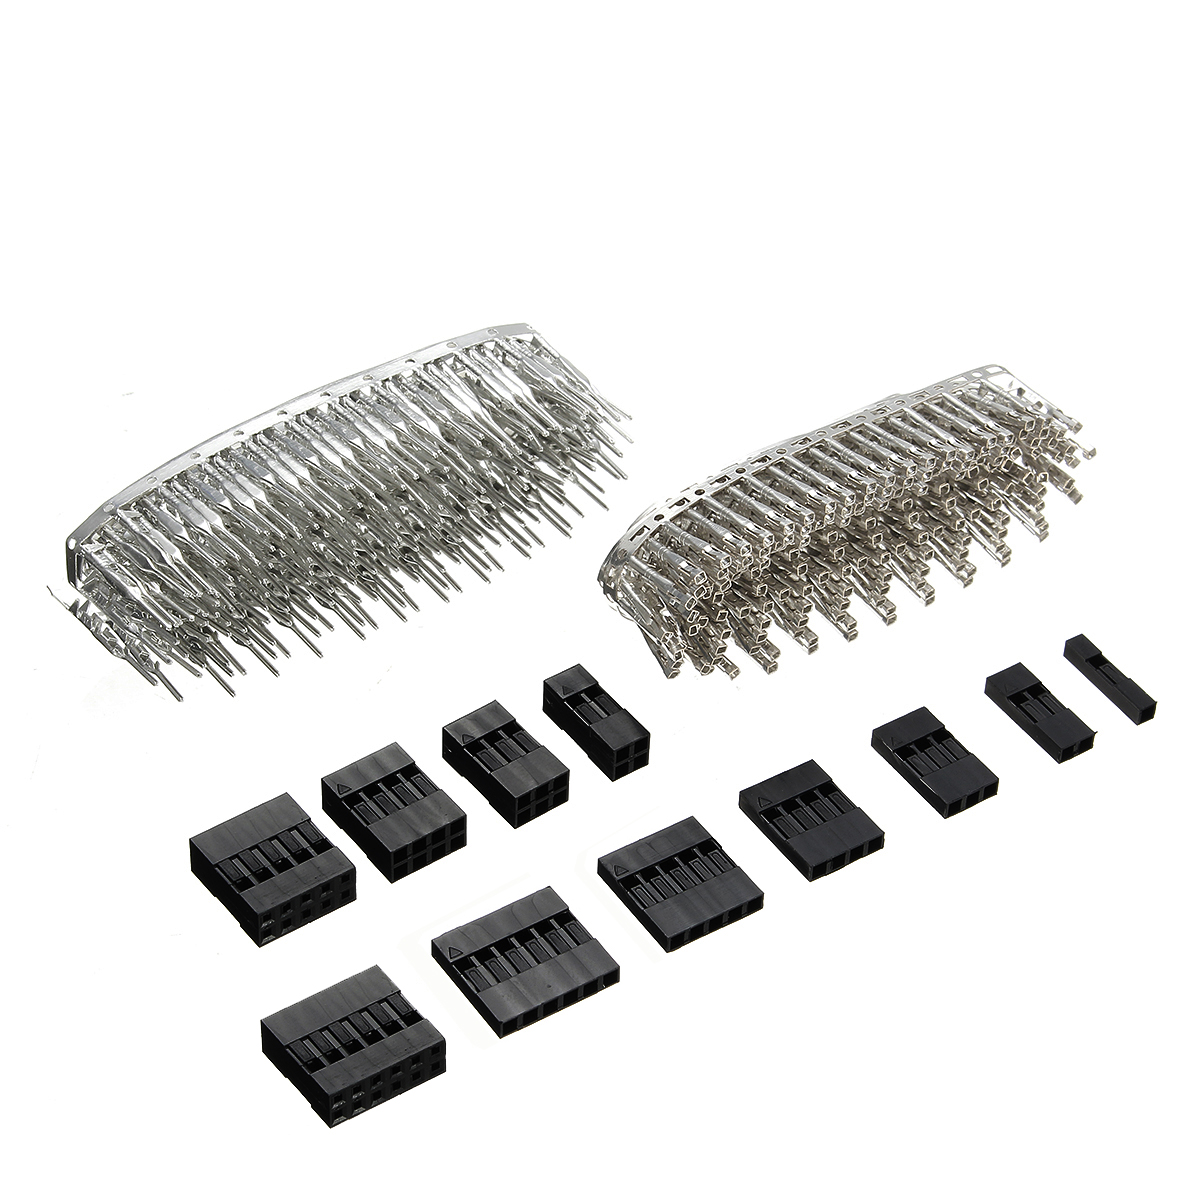 Excellway-TC10-620pcs-Wire-Jumper-Pin-Header-Connector-Housing-Kit-For-Dupont-and-Crimp-Pins-1132947-5